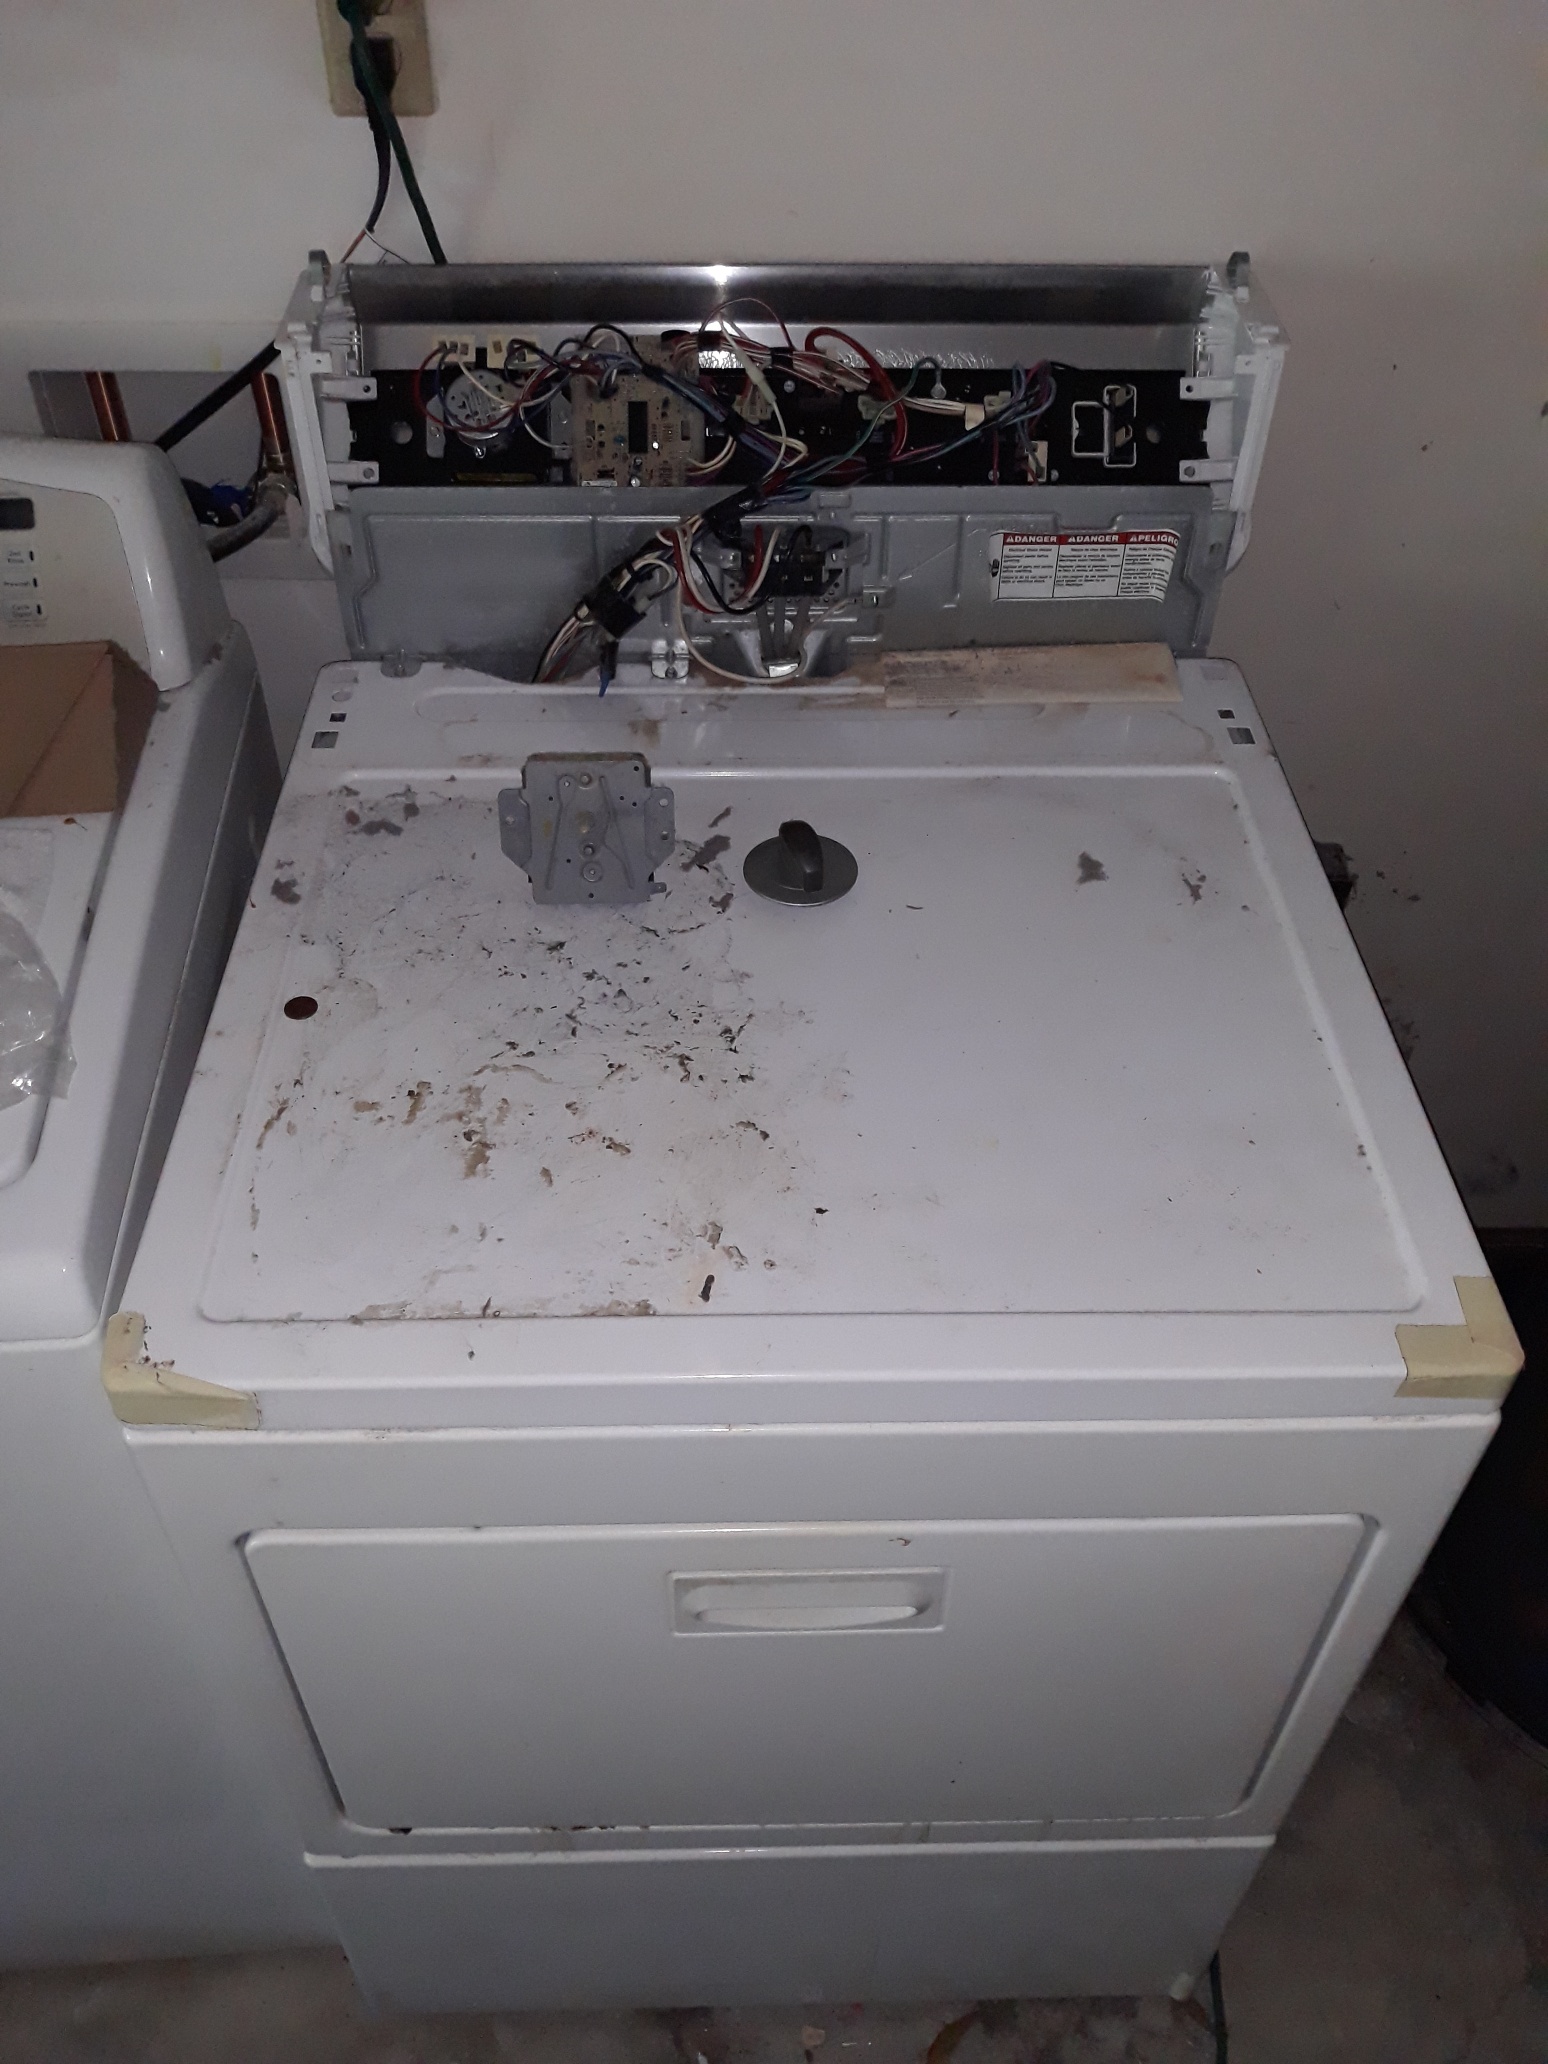 appliance repair dryer repair repair required replacement of the failed timer with a new part central avenue coleman wildwood fl 34785